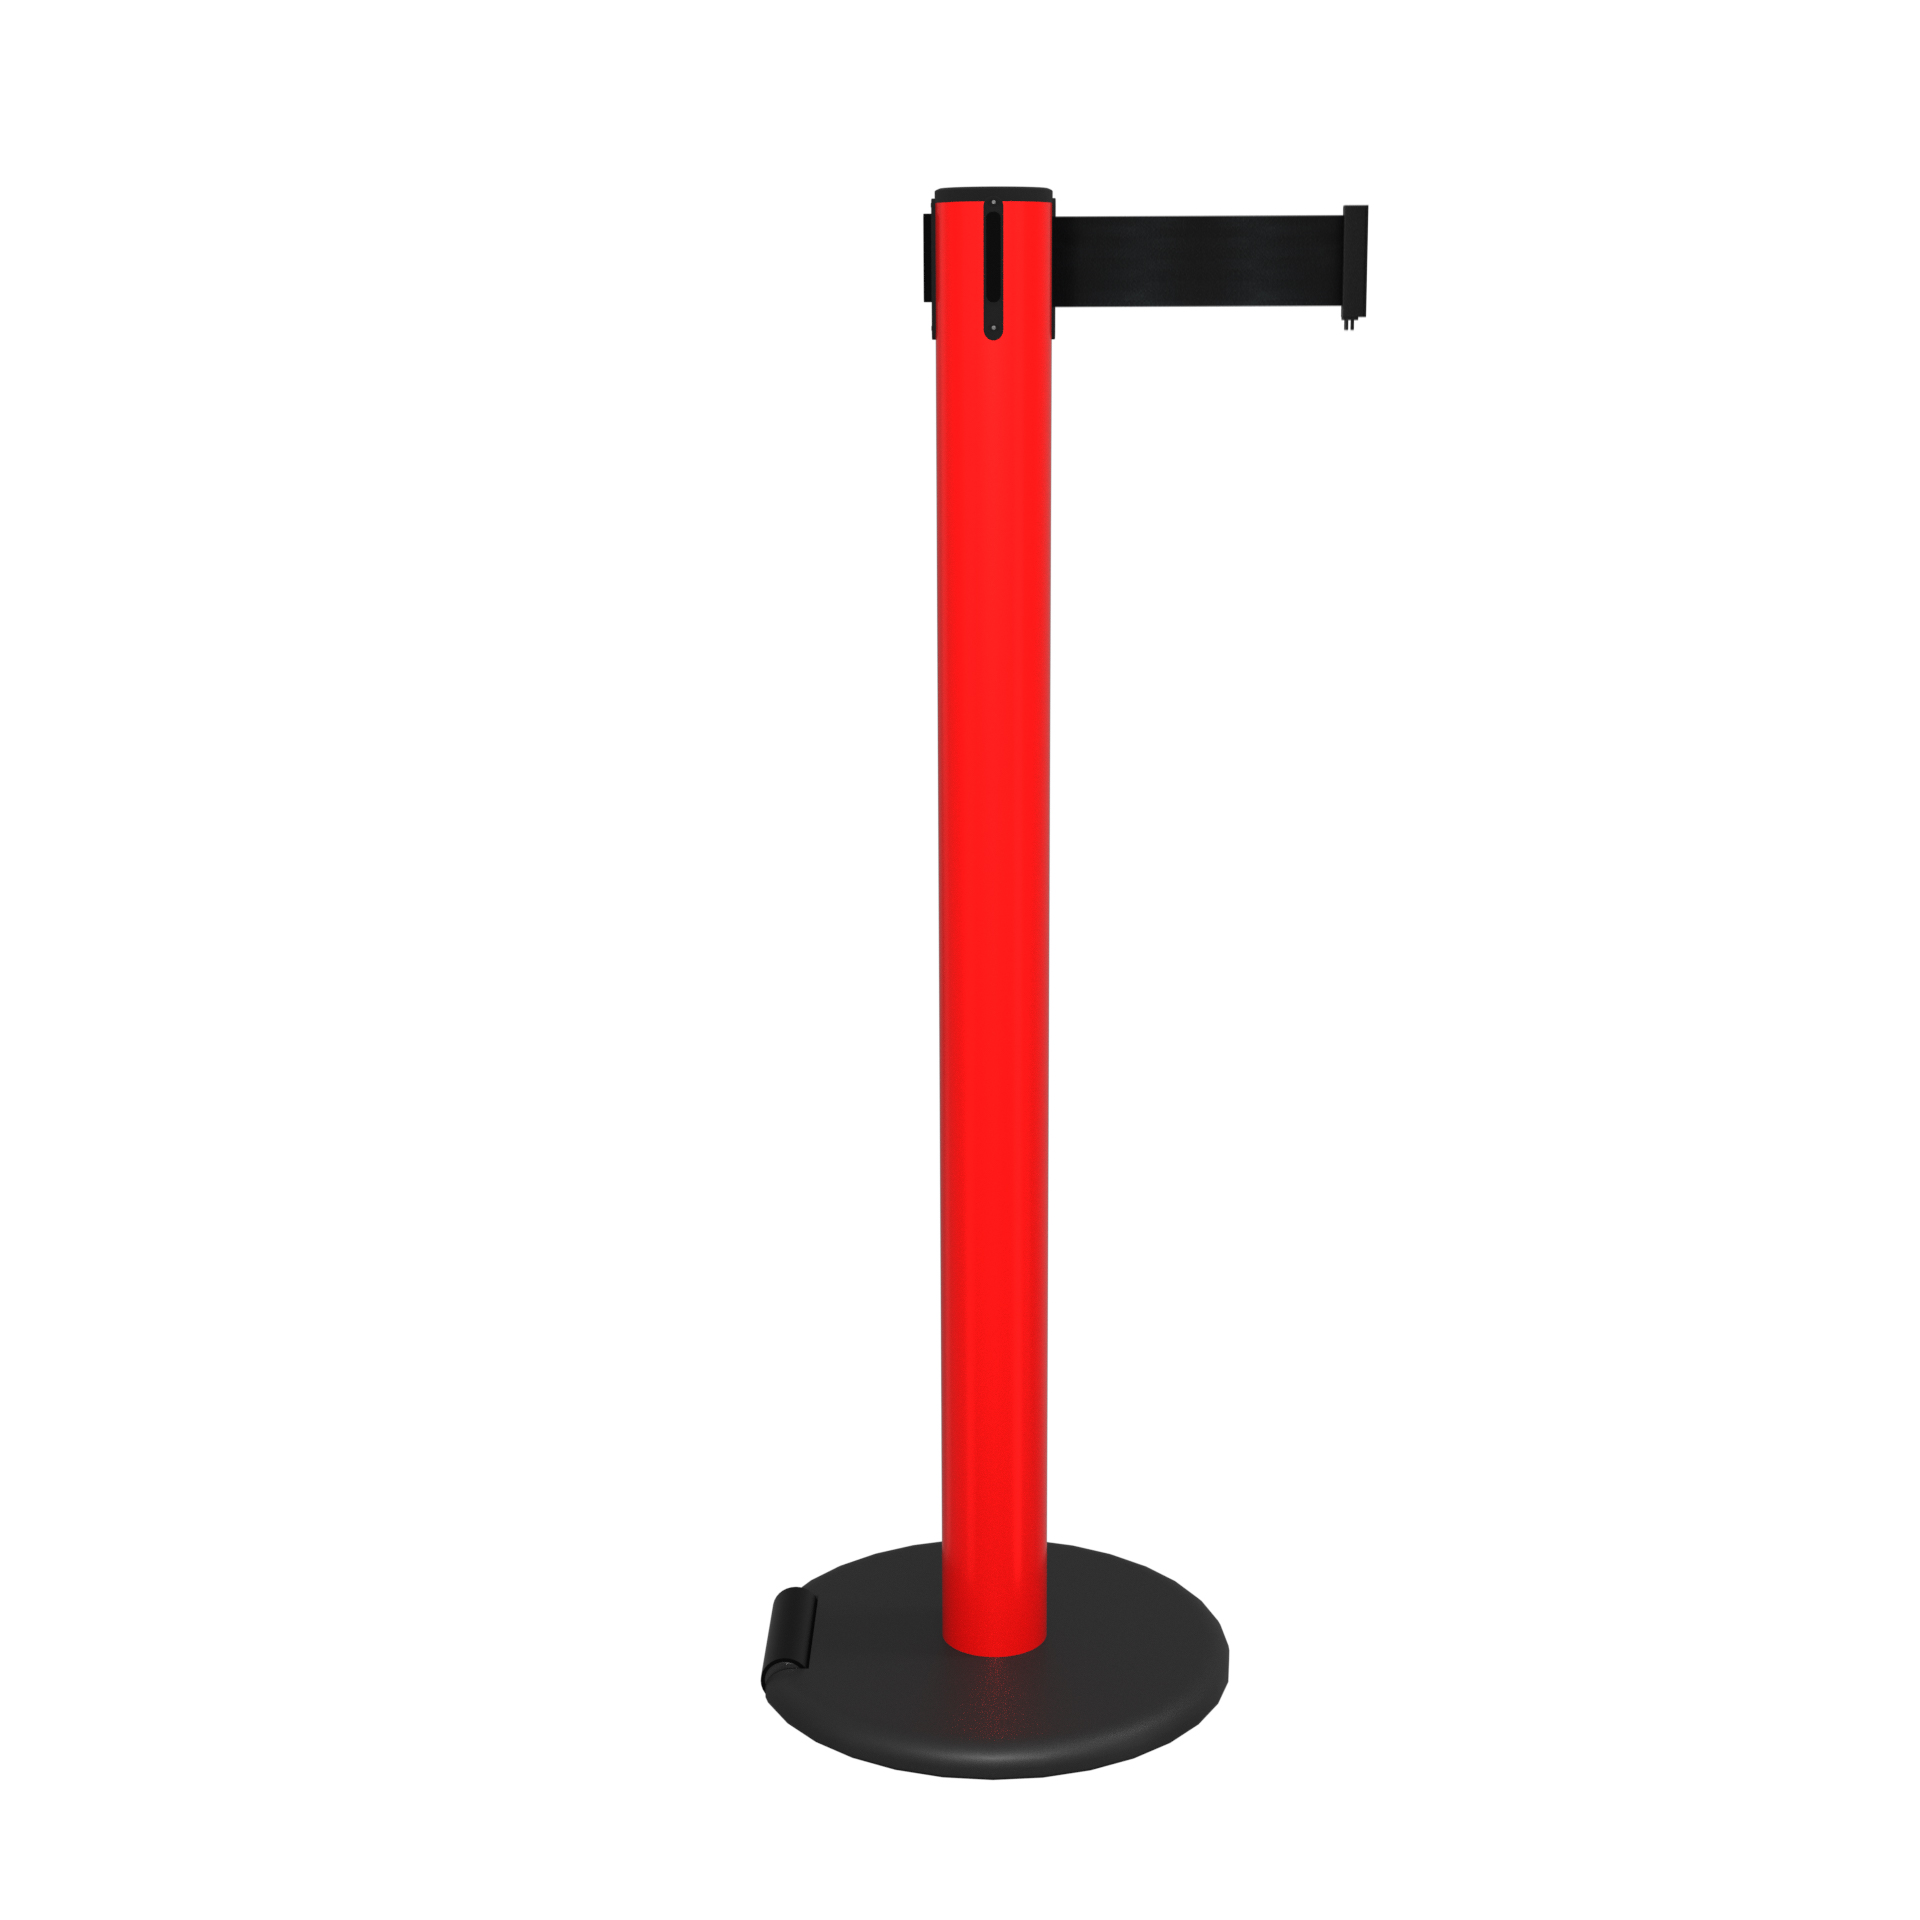 Red RollerSafety 300 Retractable Belt Barrier